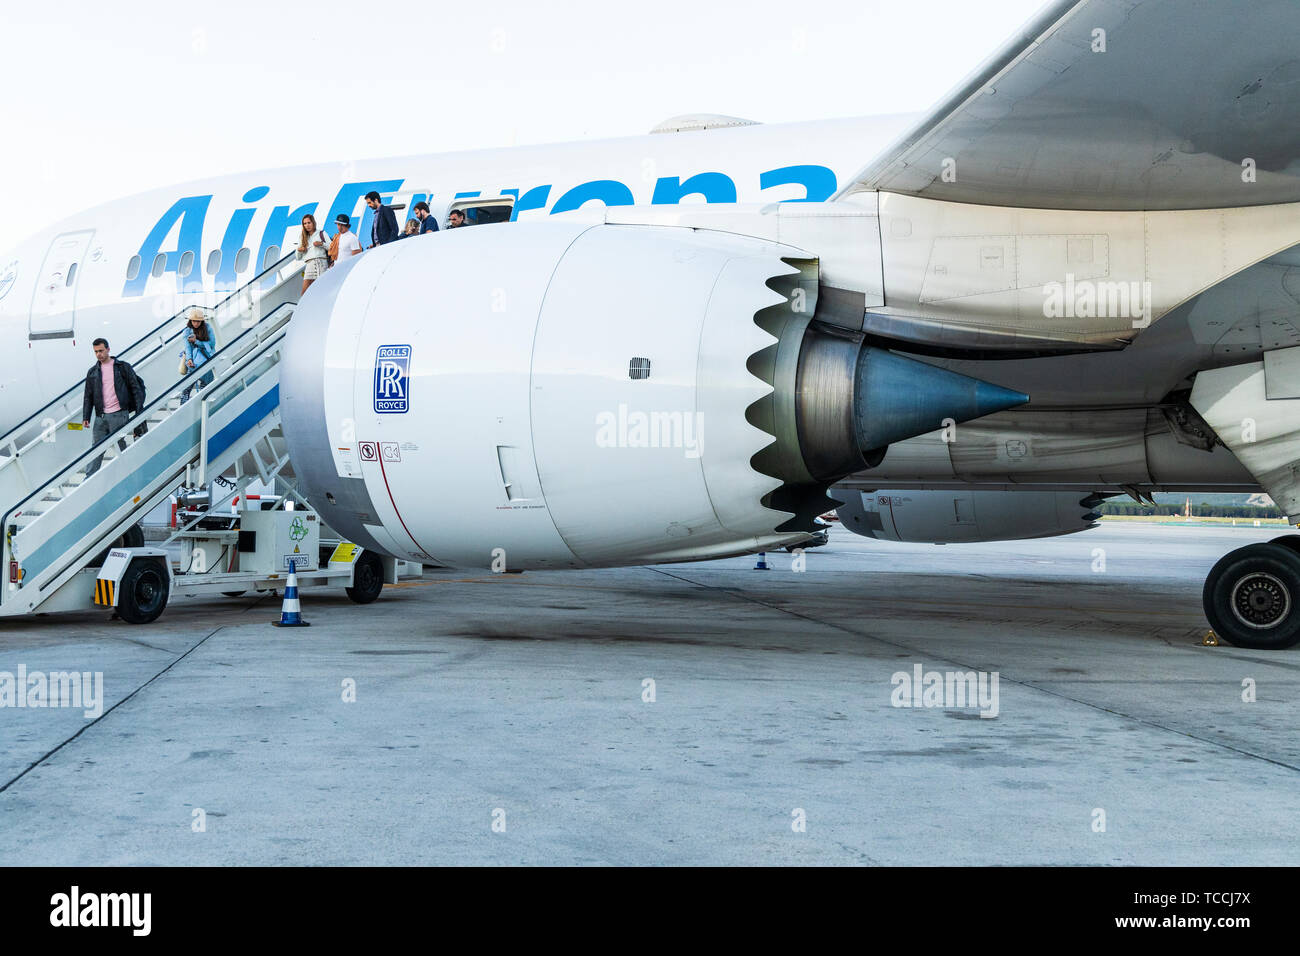 Boeing 787, Dreamliner, Rolls Royce jet engine, with Air Europa markings, at Madrid Barajas airport, Spain Stock Photo